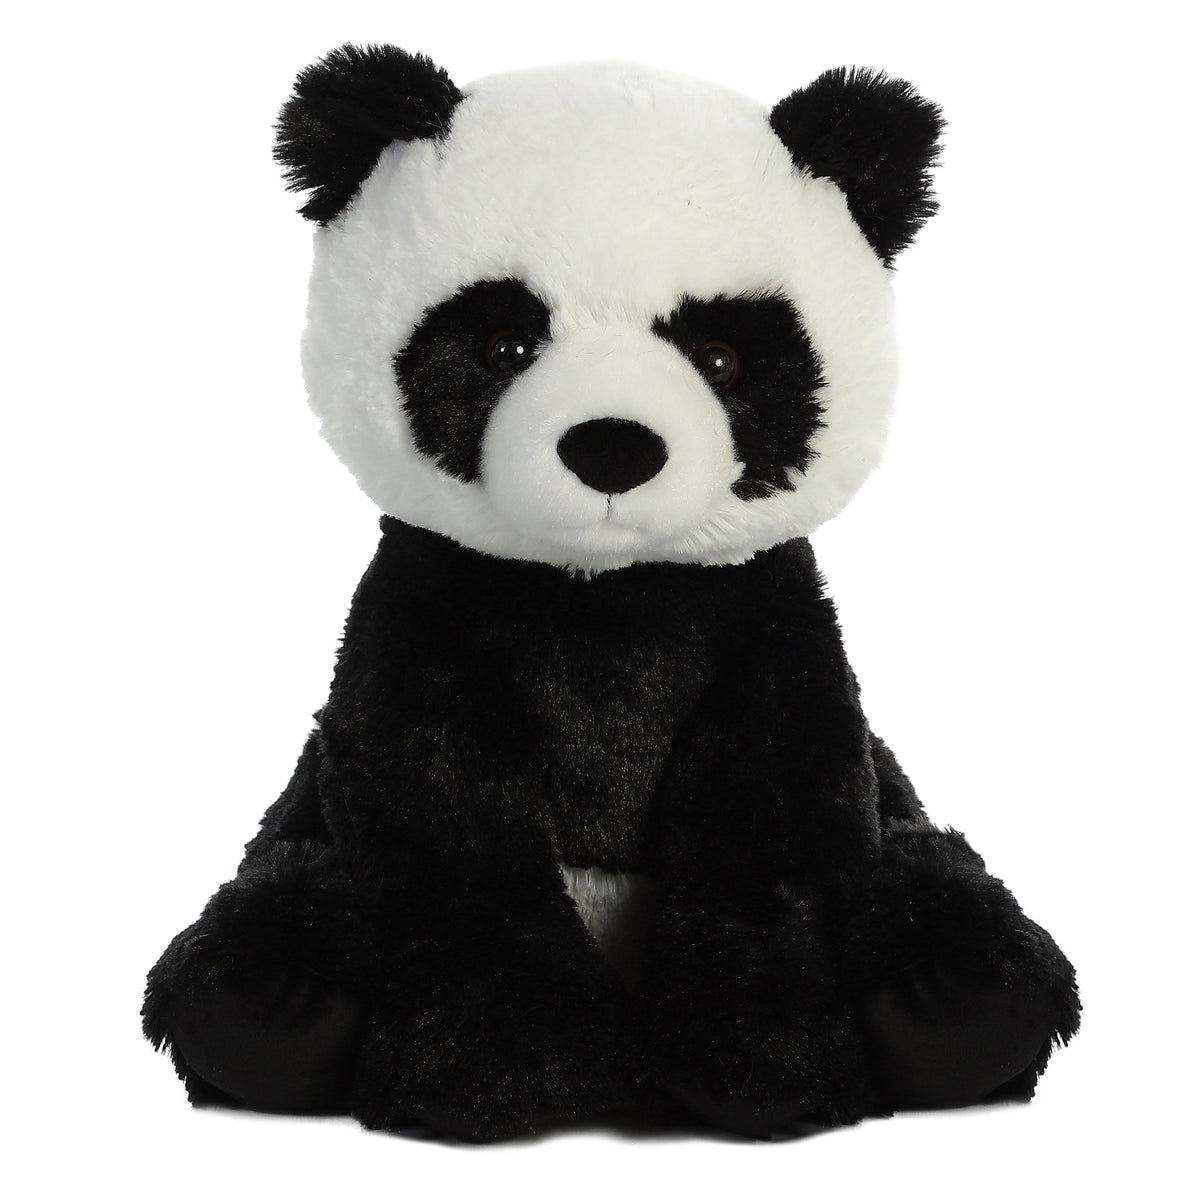 Aurora Enchanting Panda Pal Plush with soft black and white fur and sweet eyes, ideal for cuddles.